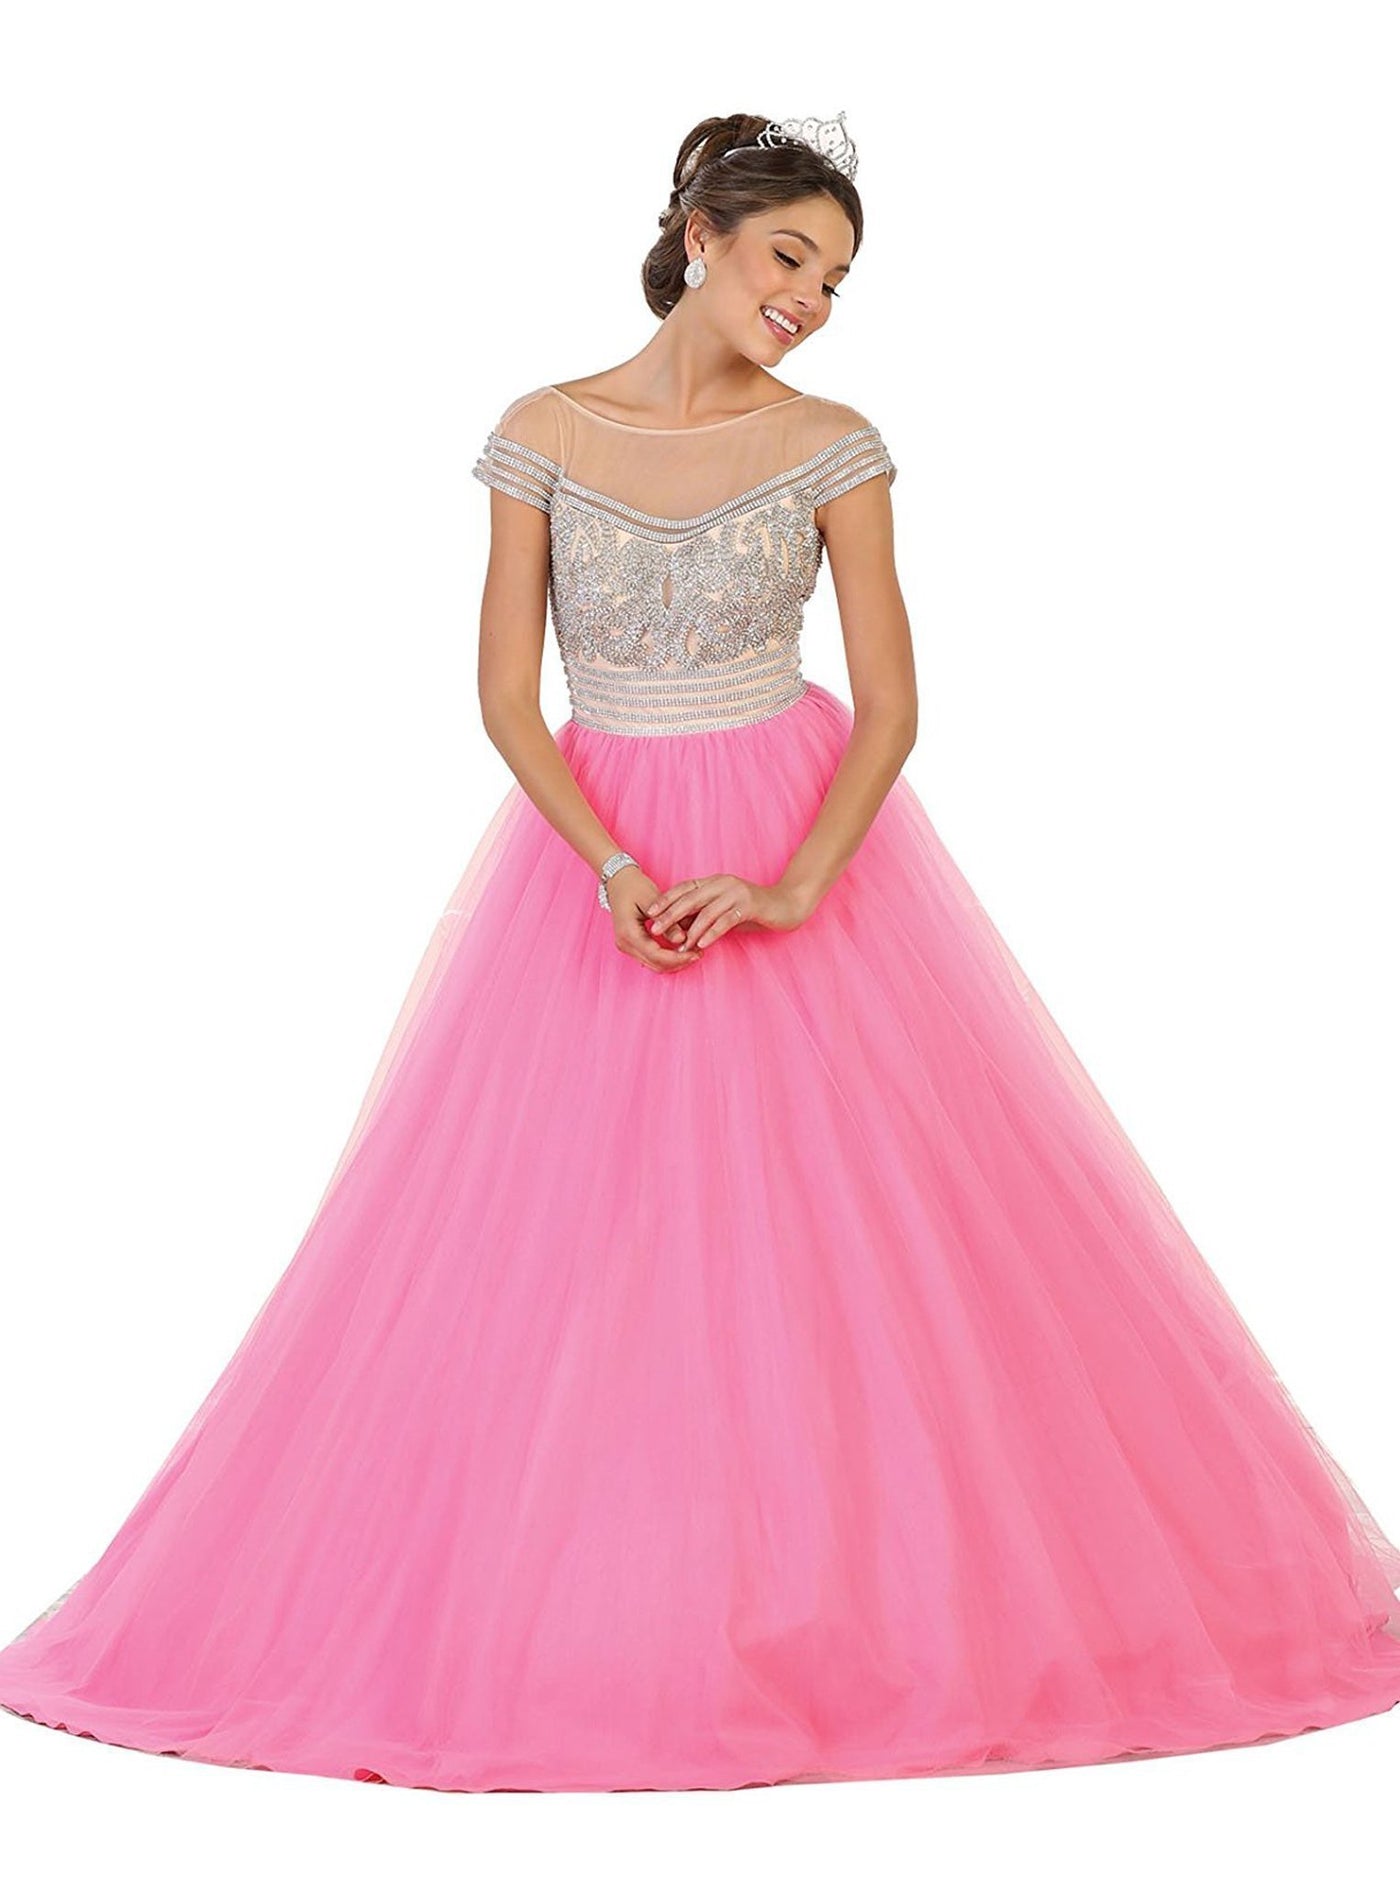 May Queen - LK87 Cap Sleeve Crystal Embellished Quinceanera Ballgown In Pink